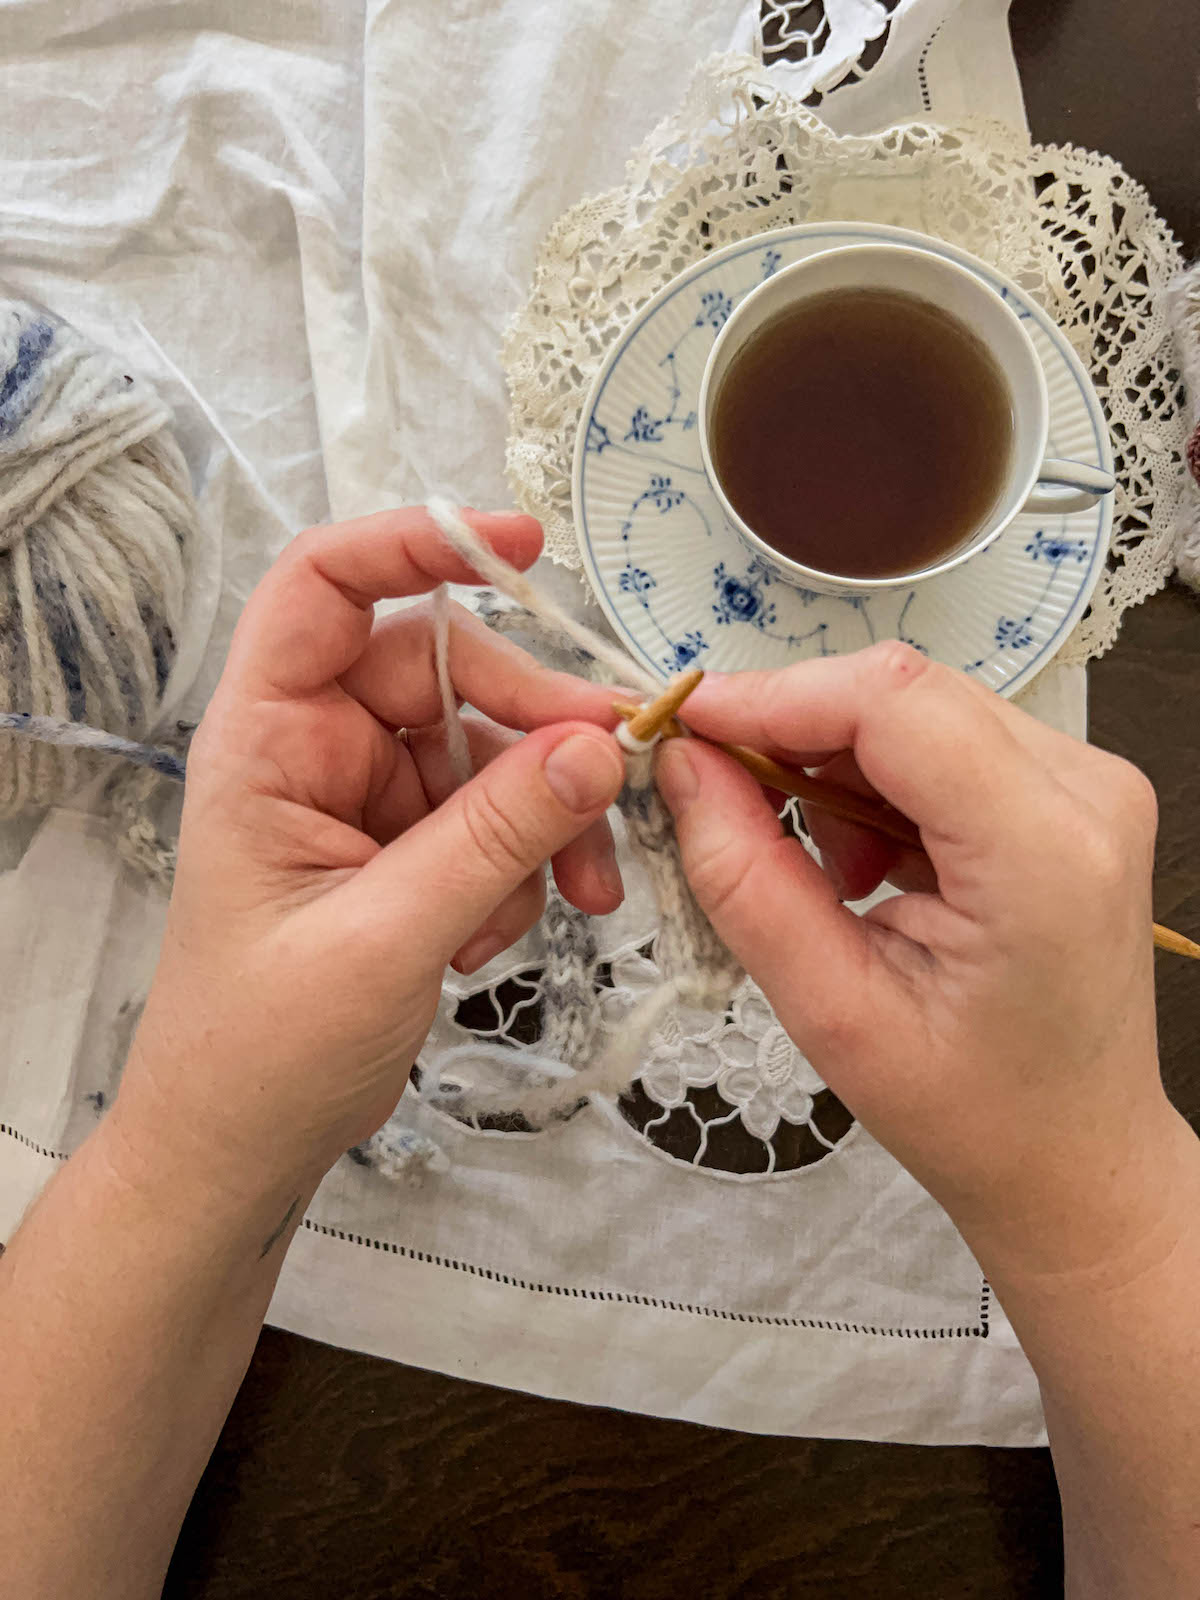 A white woman's hands (mine!) hold two wooden knitting needles while they work on making an i-cord. In the background on the table is a ball of yarn and a teacup full of tea.